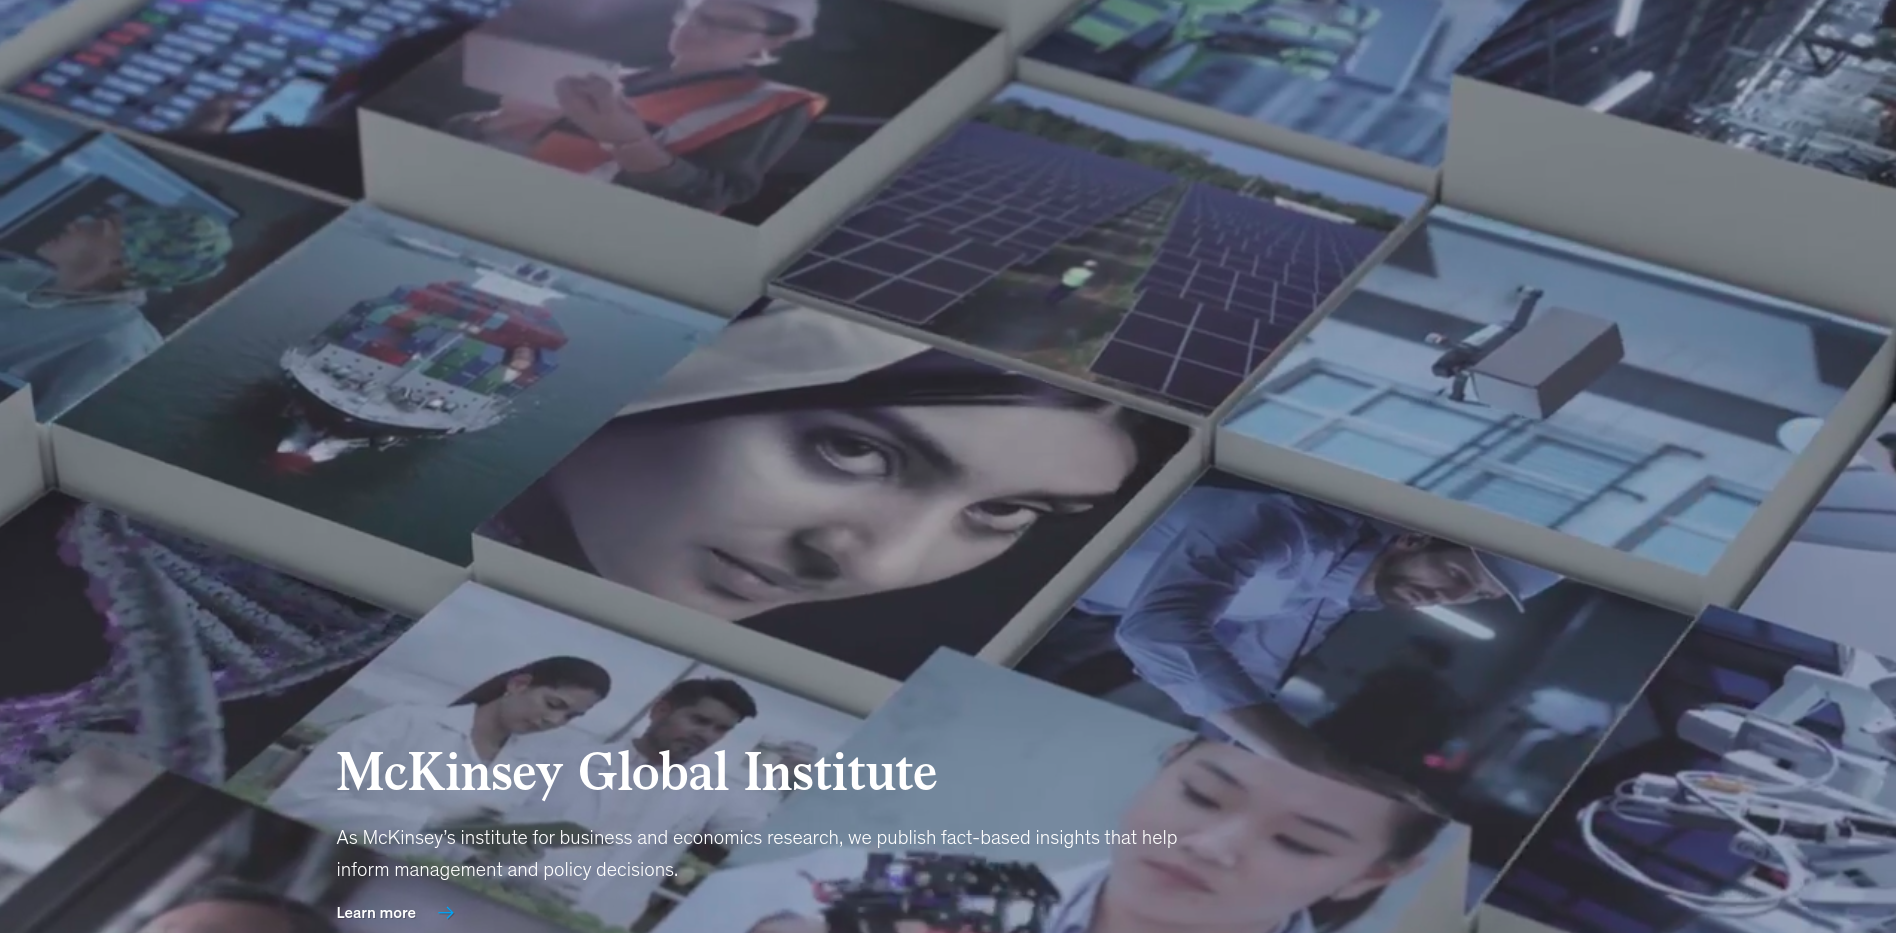 McKinsey Research: Impact and Insights of one of the World’s Leading Research Firm